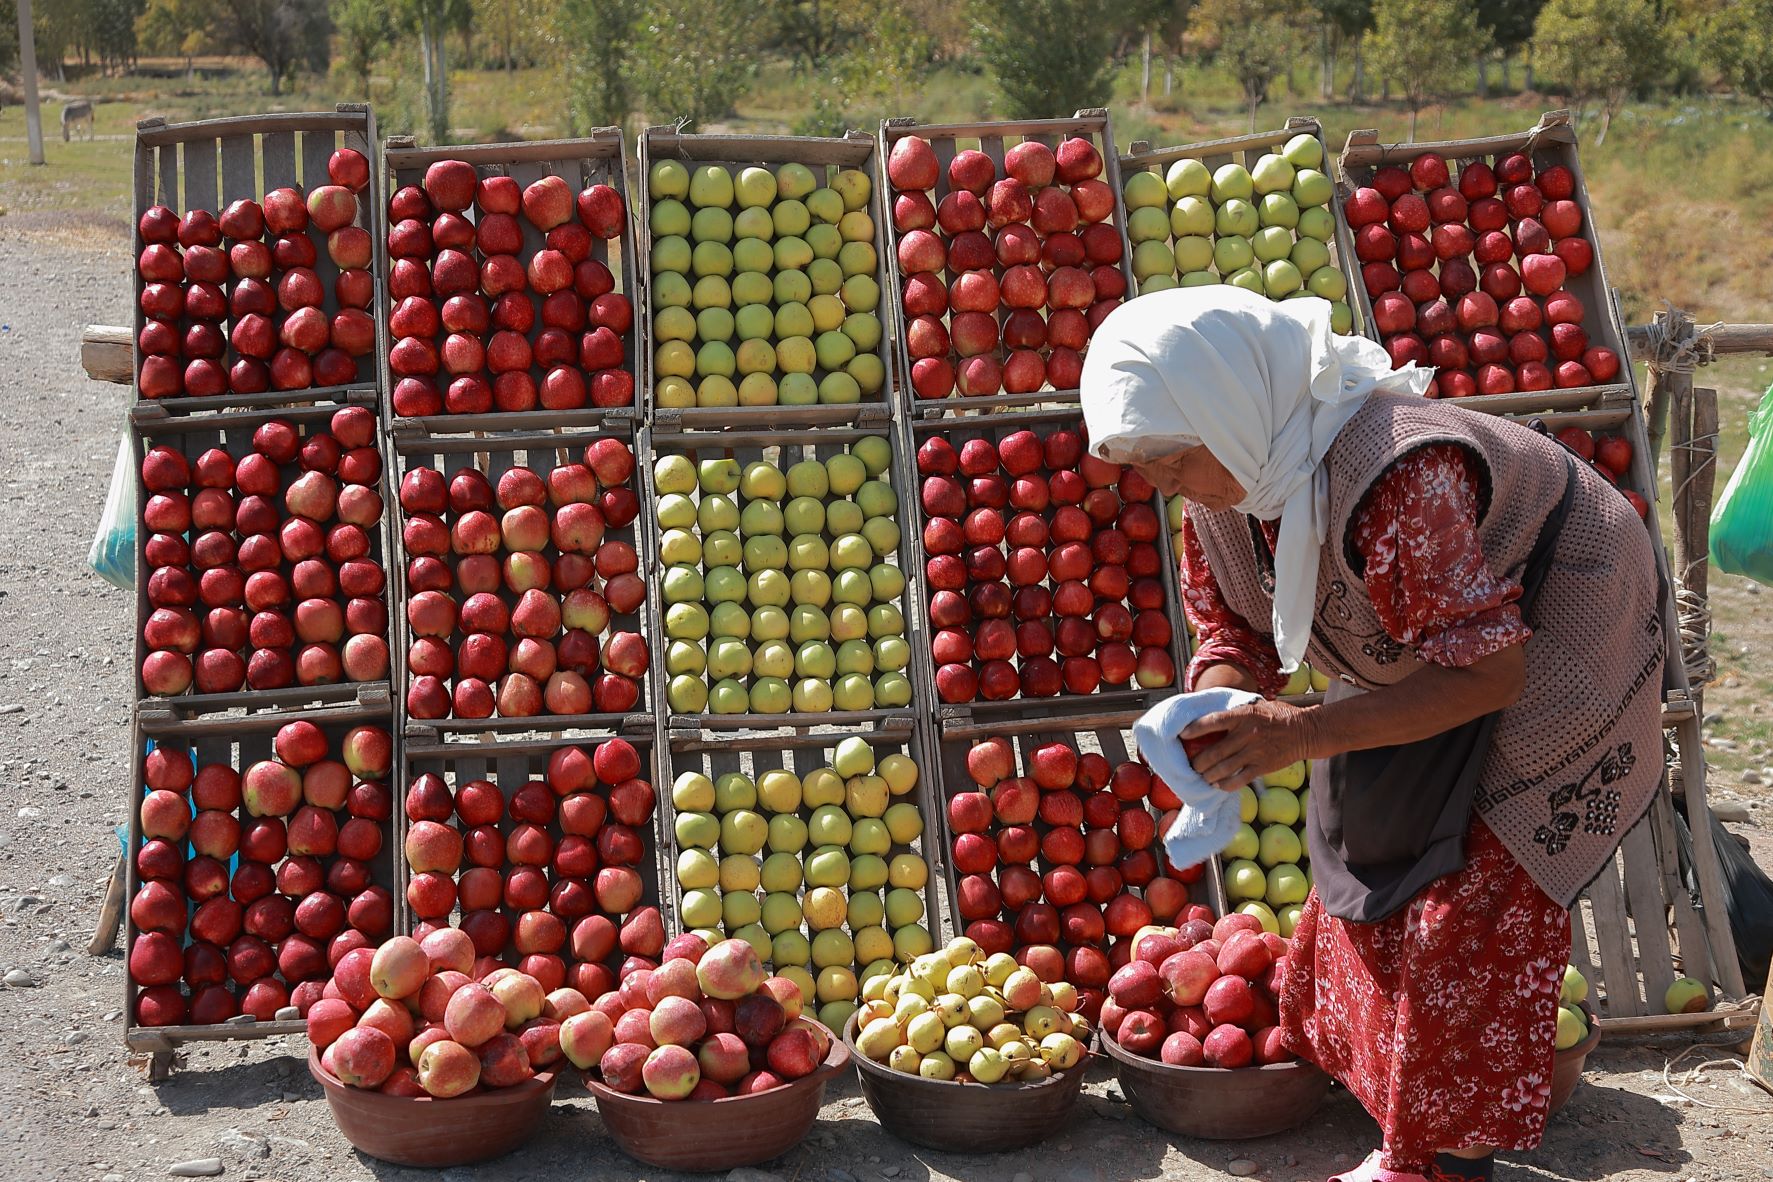 An old lady by the road side wiping apples in a stand